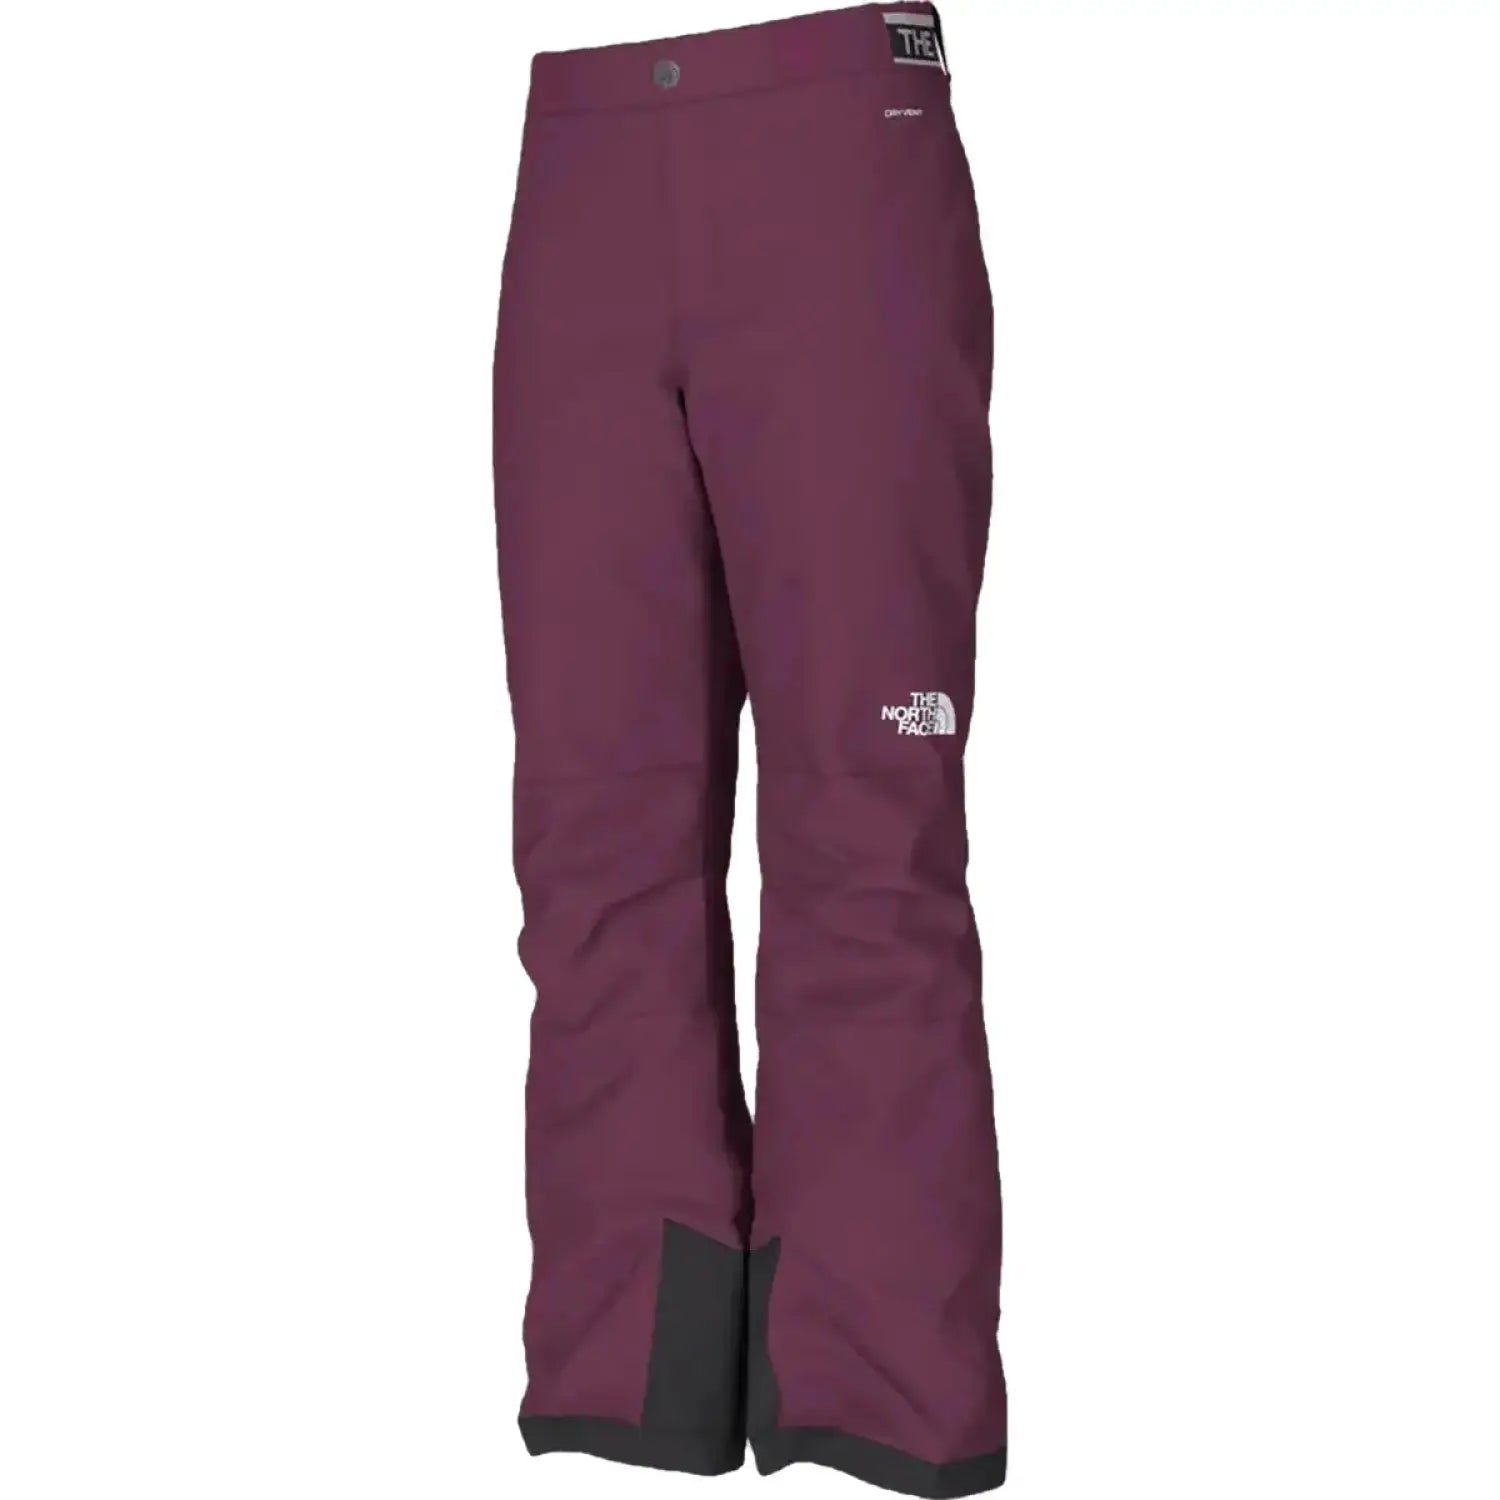 The North Face Girl's Freedom Insulated Pant show in the Boysenberry color option. Front view.